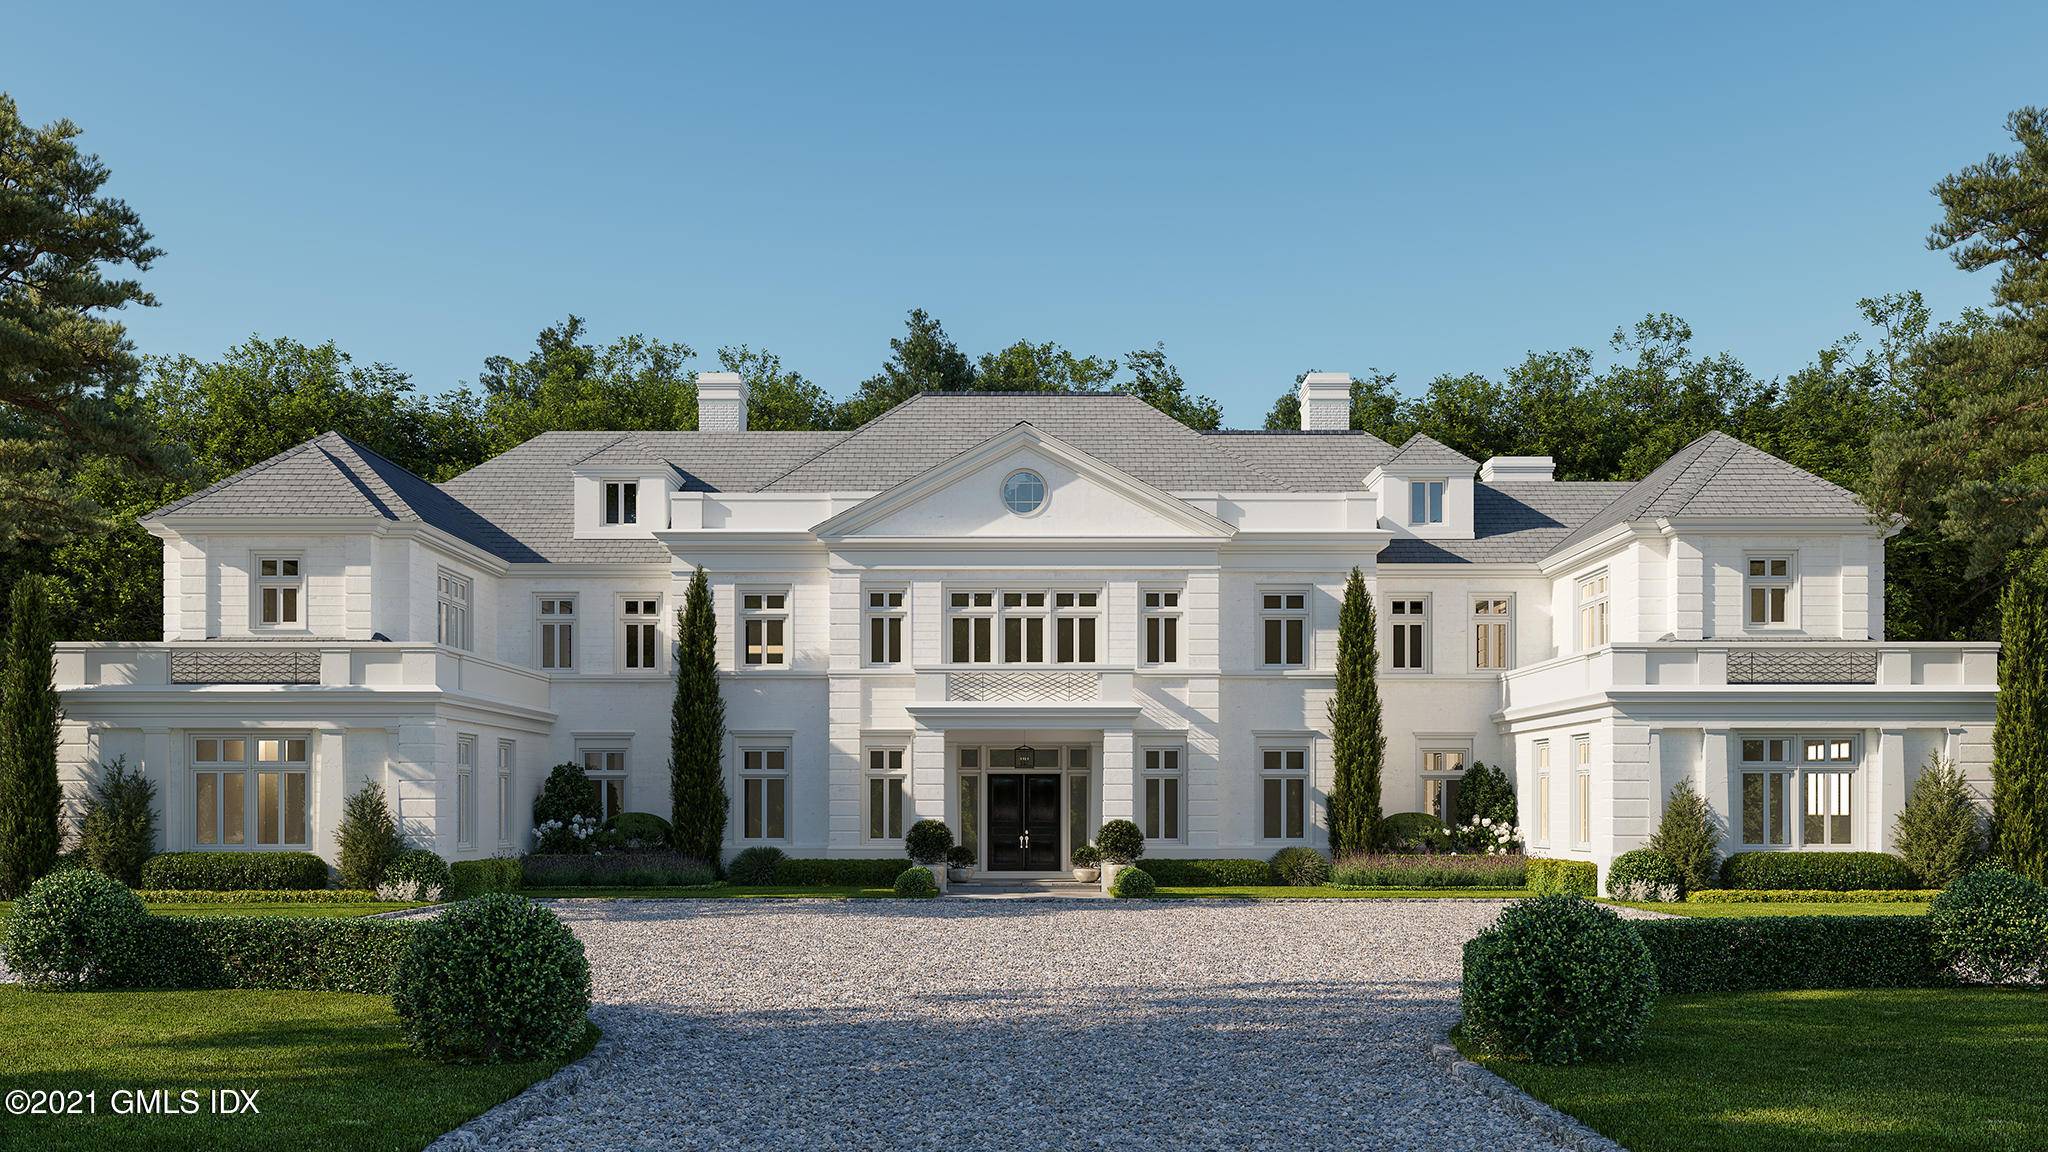 Ten park like acres, aptly named Windswept Farm, provide an idyllic backdrop for the upcoming to be built ultra chic seven bedroom Manor from Granoff Architects, in coveted Conyers Farms.